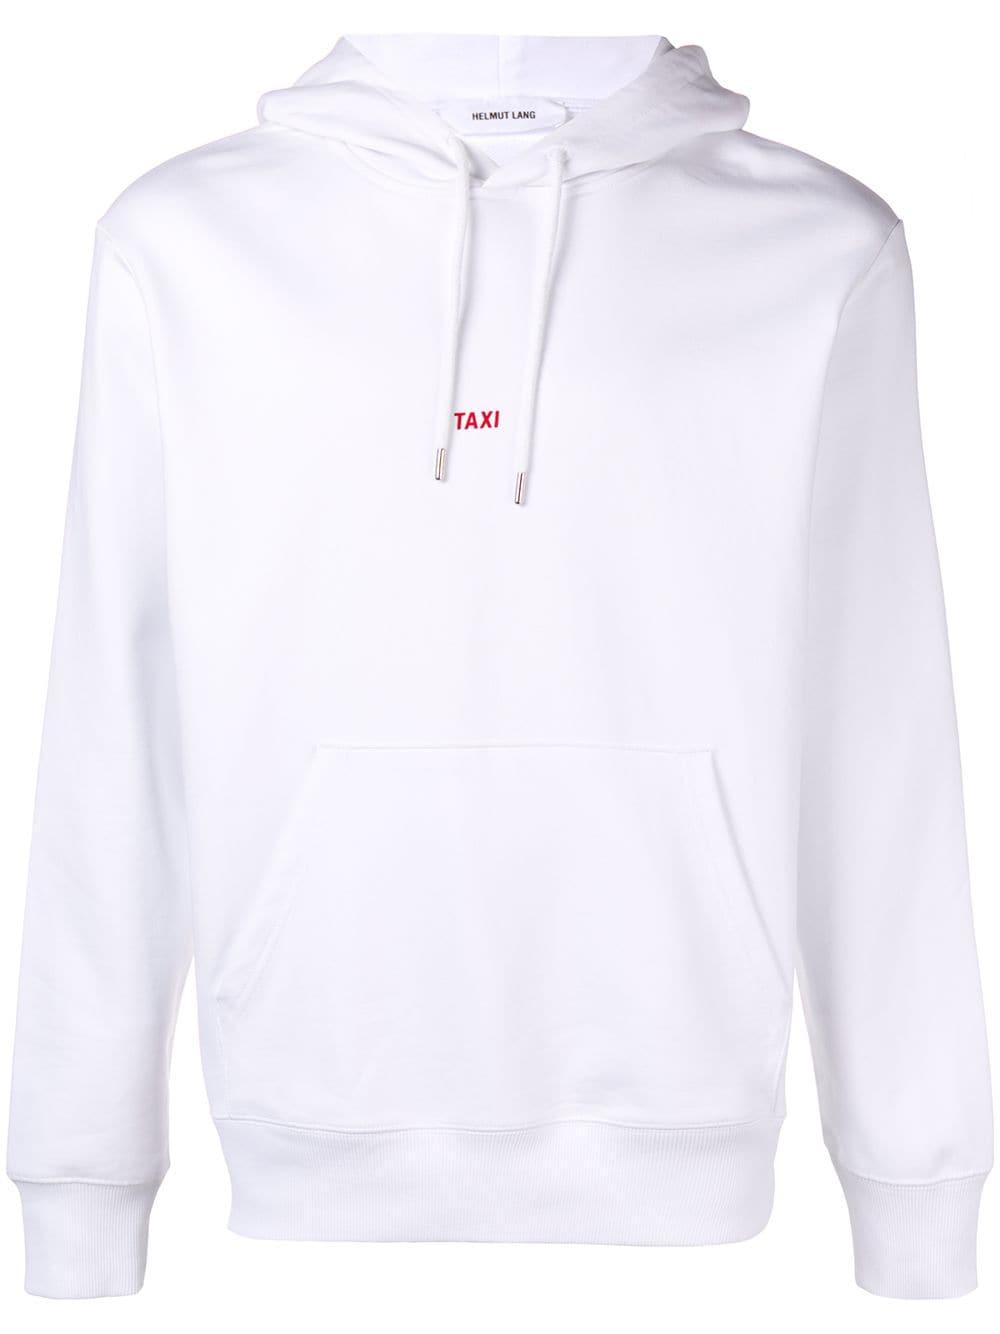 Helmut Lang Paris Taxi Hoodie in White for Men | Lyst